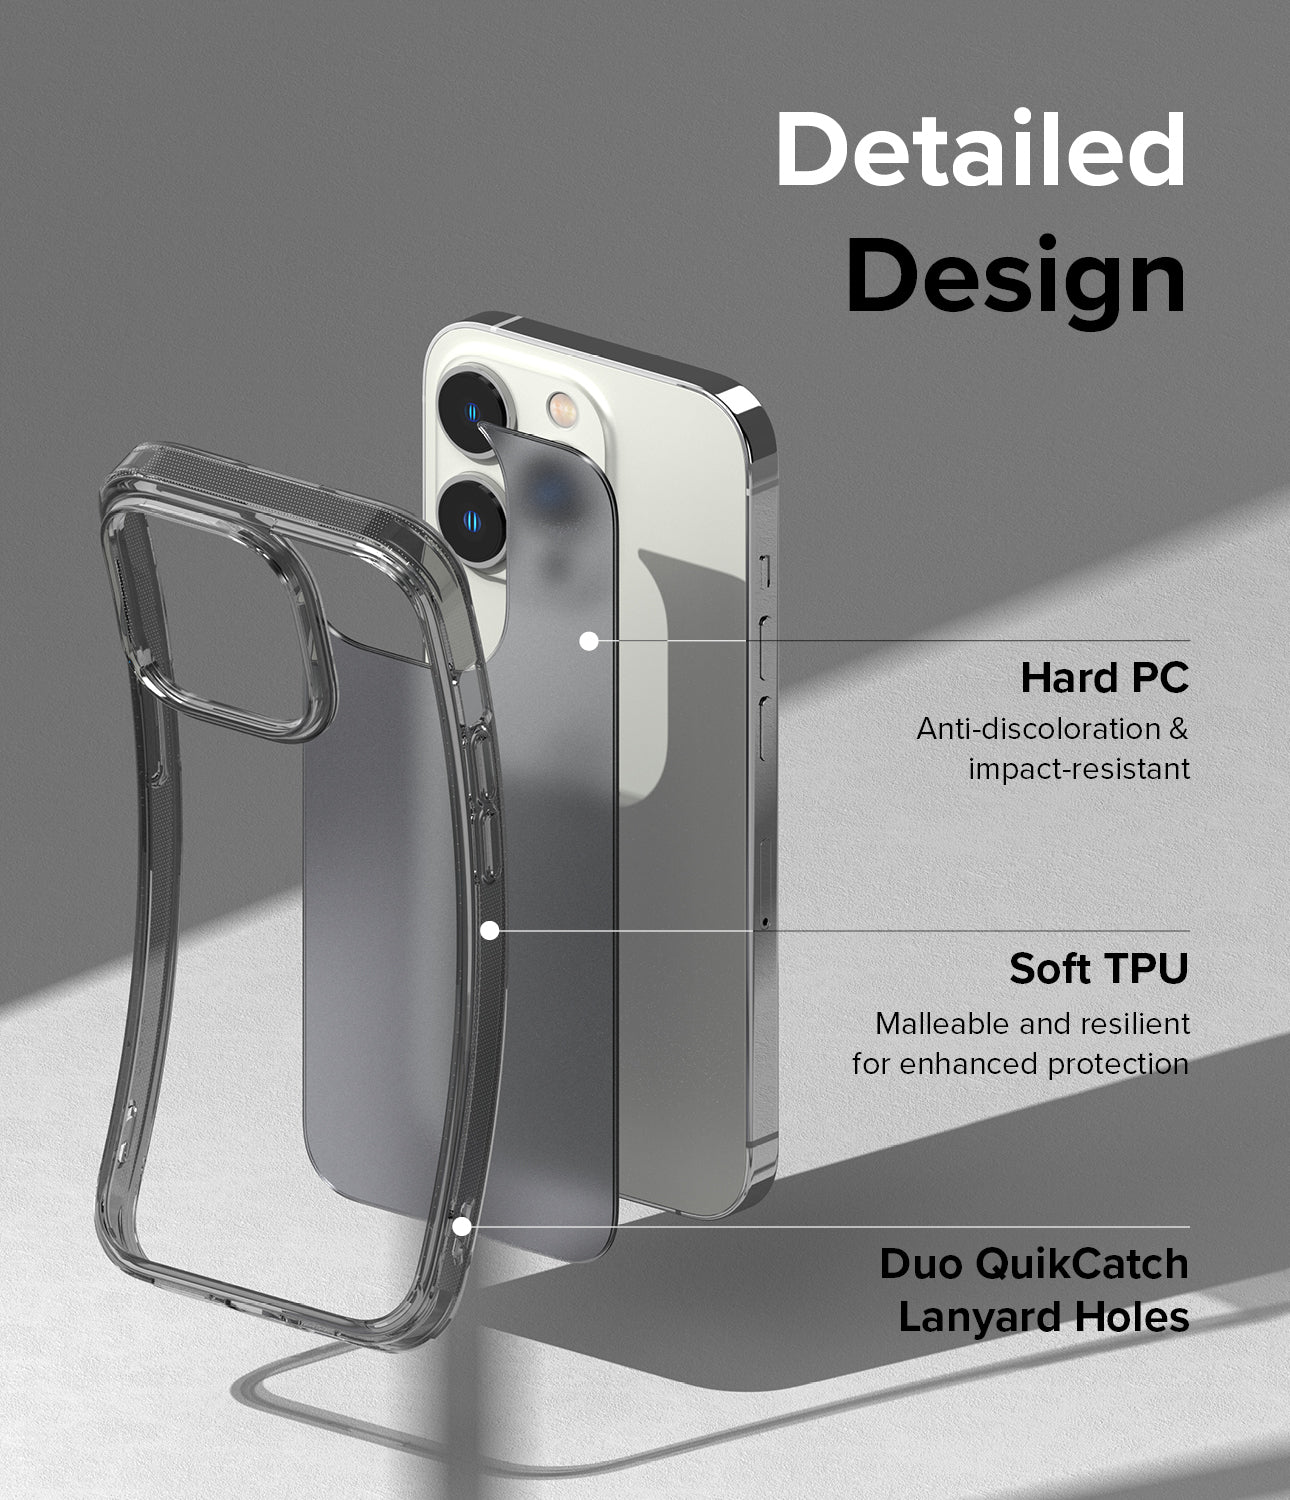 iPhone 14 Pro Max Case | Fusion Matte - Smoke Black - Detailed Design. Anti-discoloration and impact-resistant with Hard PC. Malleable and resilient for enhanced protection with Soft TPU. Duo QuikCatch Lanyard Holes.